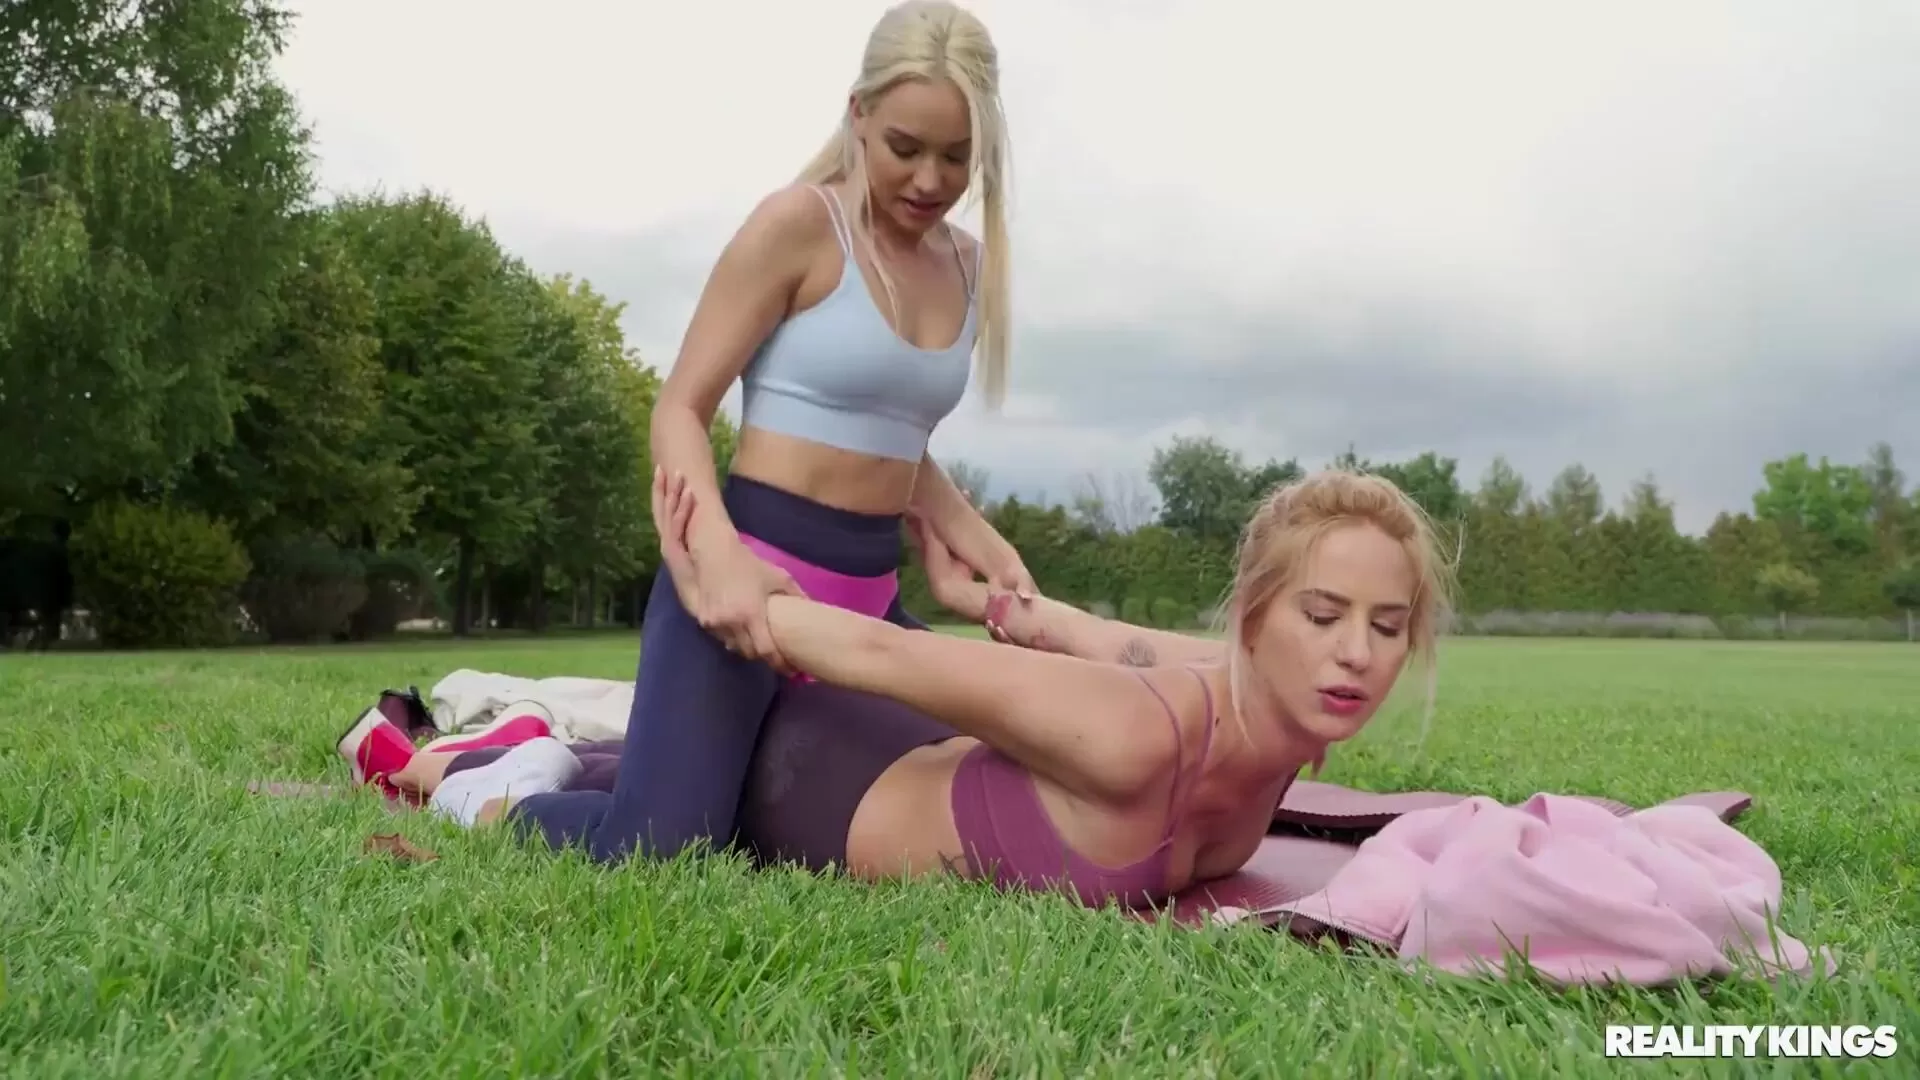 Reality Kings Yoga Lesbian - Blonde will need new yoga pants after that hot lesbian strapon session